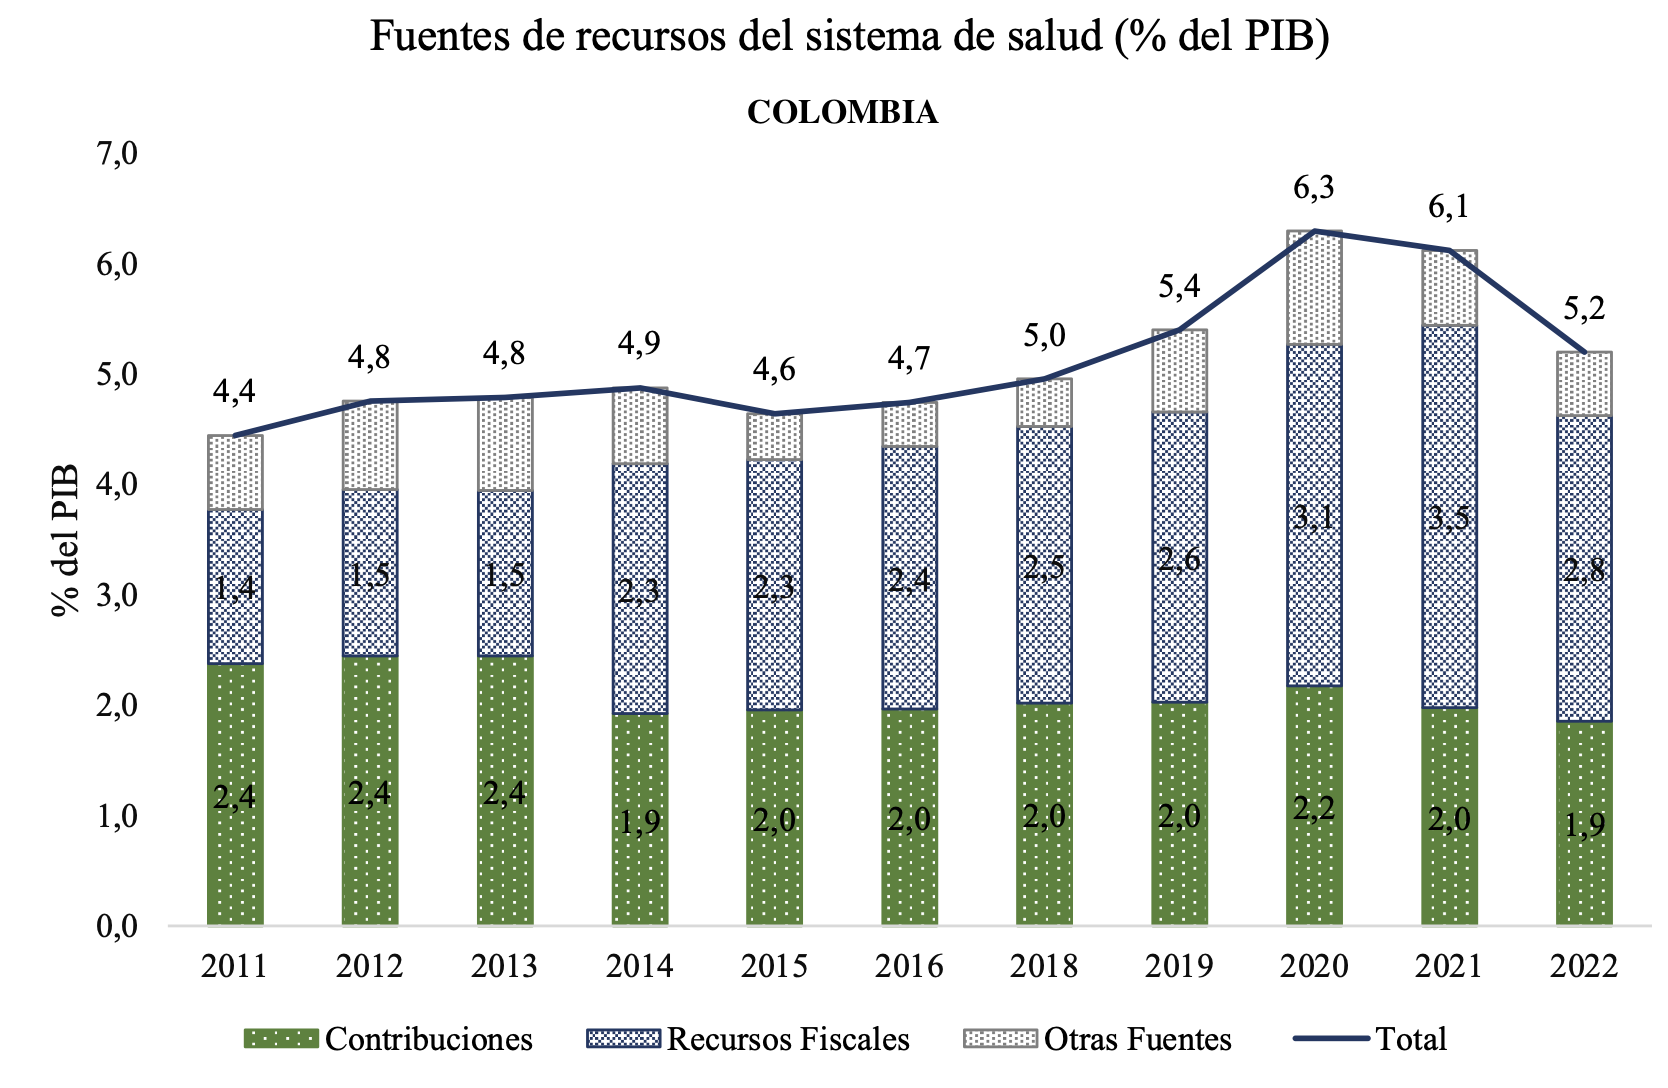 Sources and Uses of Health System Financing in Colombia